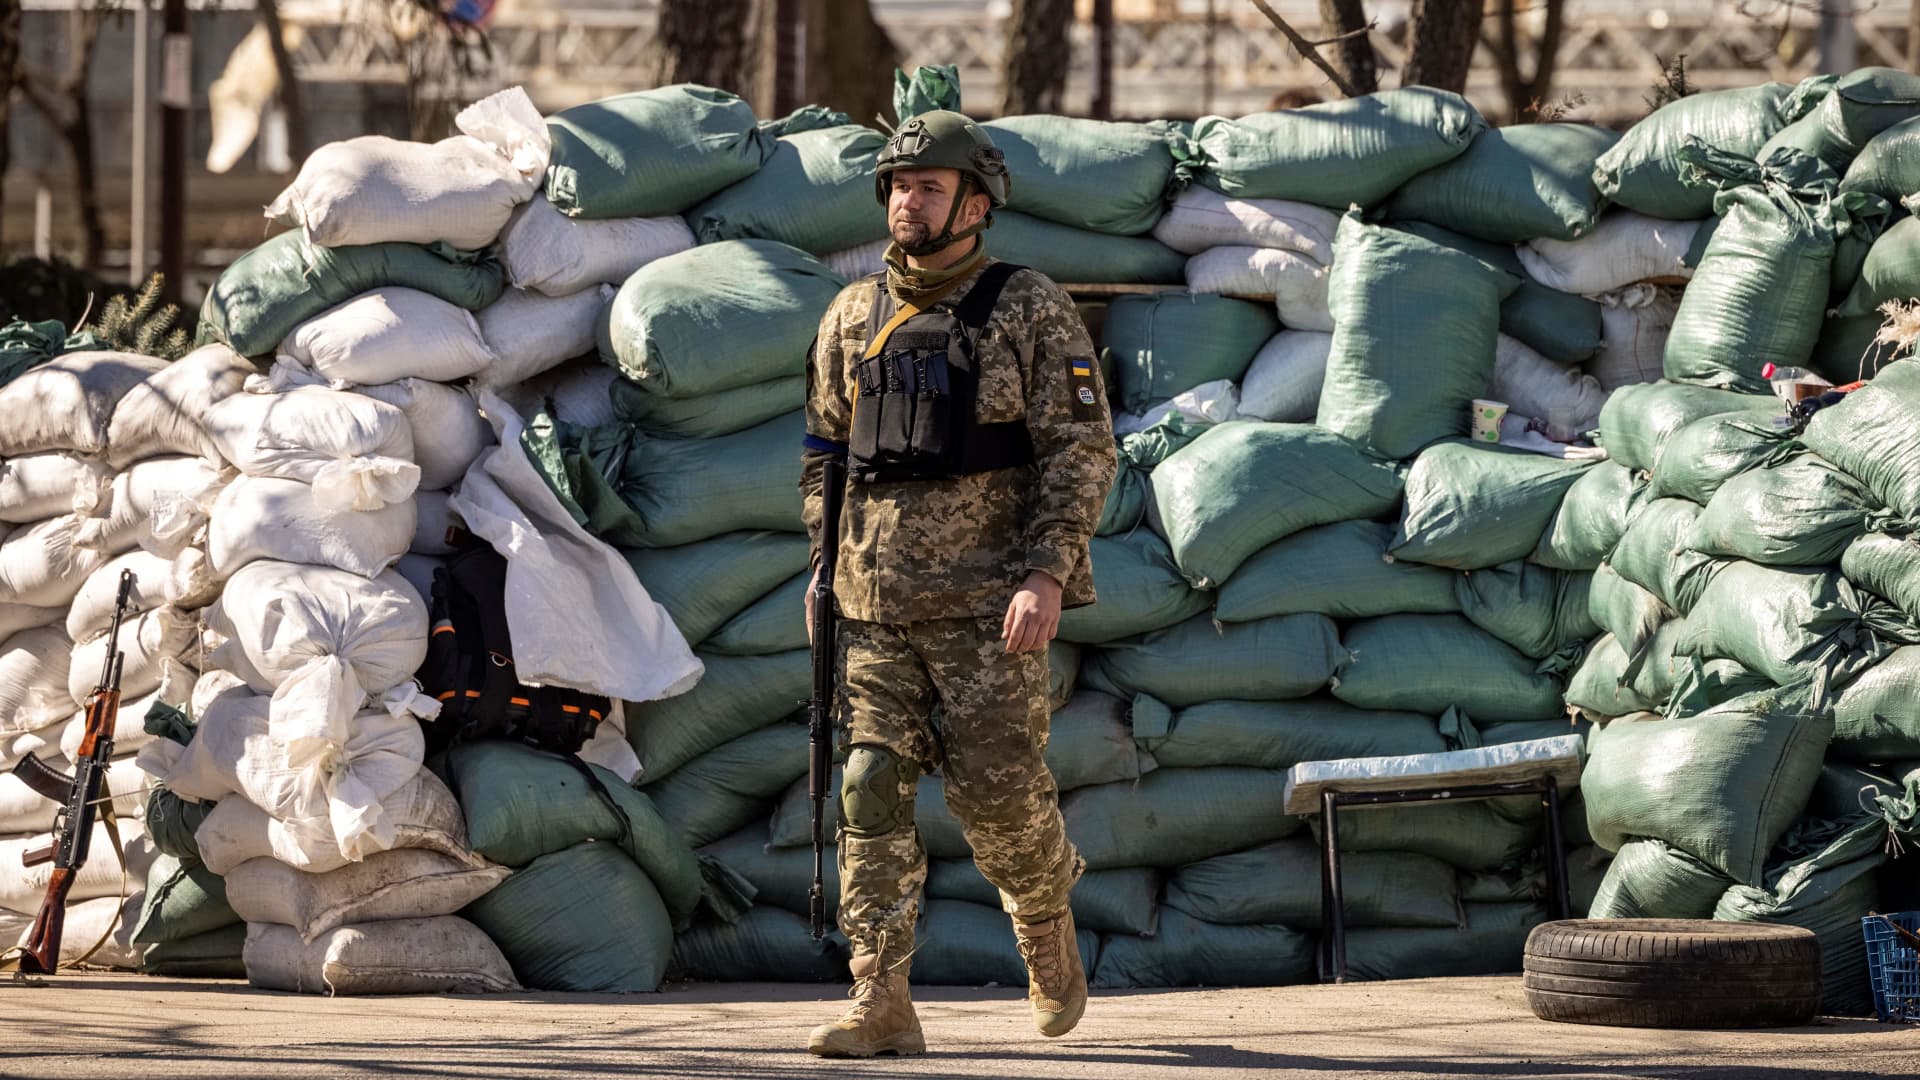 A Ukrainian serviceman mans a military check point in Kyiv on March 21, 2022 before the start of a 35-hour curfew at 8:00pm.